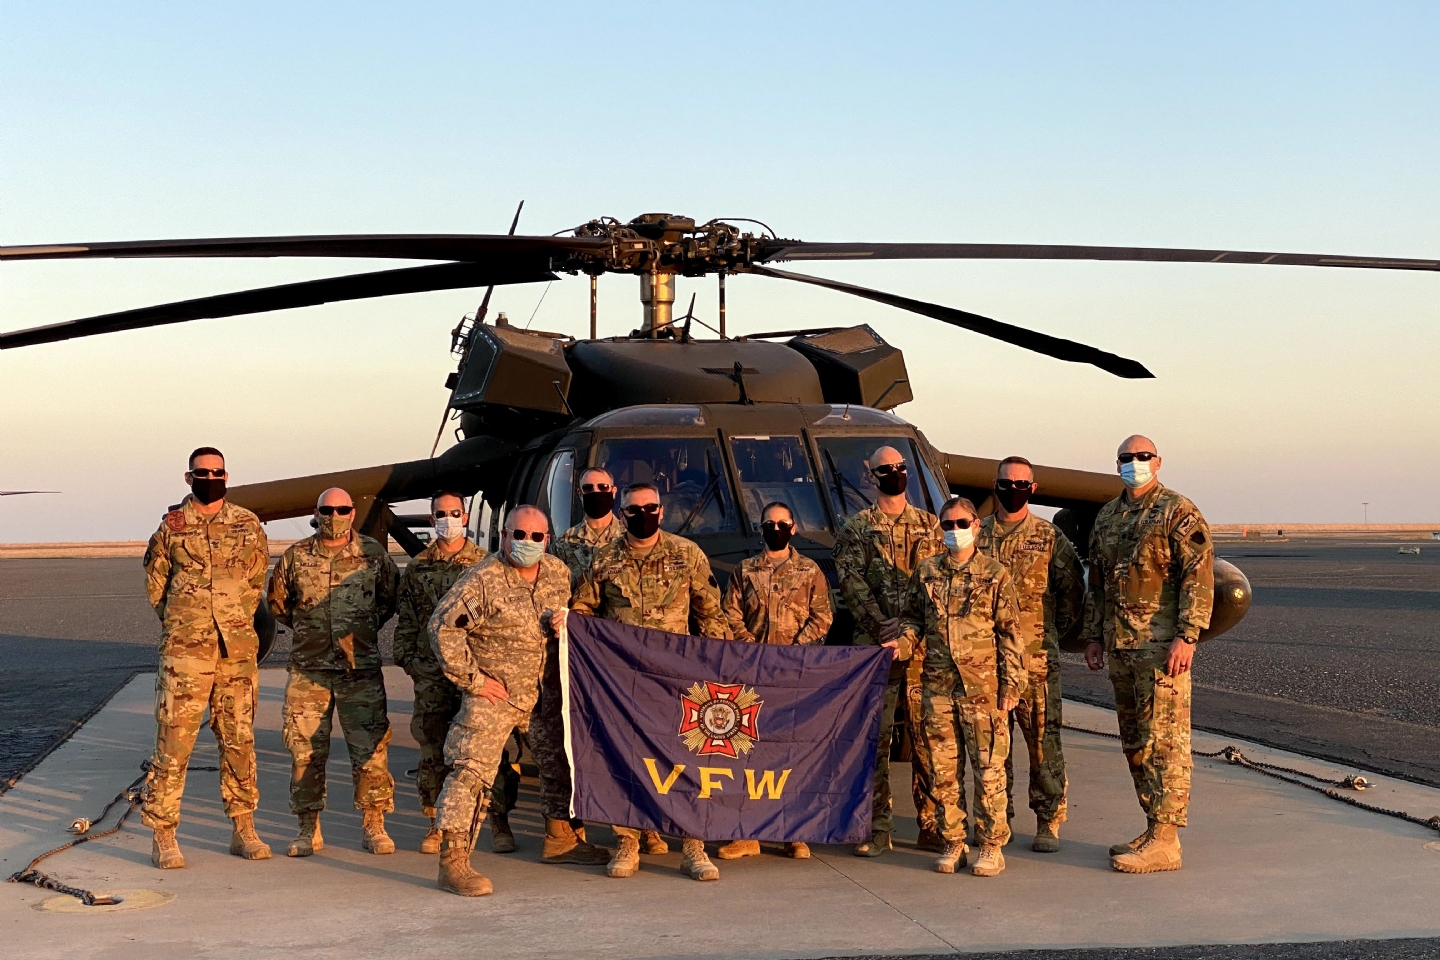 The 28th Infantry Division Expeditionary Combat Aviation Brigade poses with a VFW flag in front of a Blackhawk helicopter. The flag has traveled around the world to units with care packages. It hangs at PA VFW HQs with these photos around it. David Sandman, former Director of Communications, began the tradition.